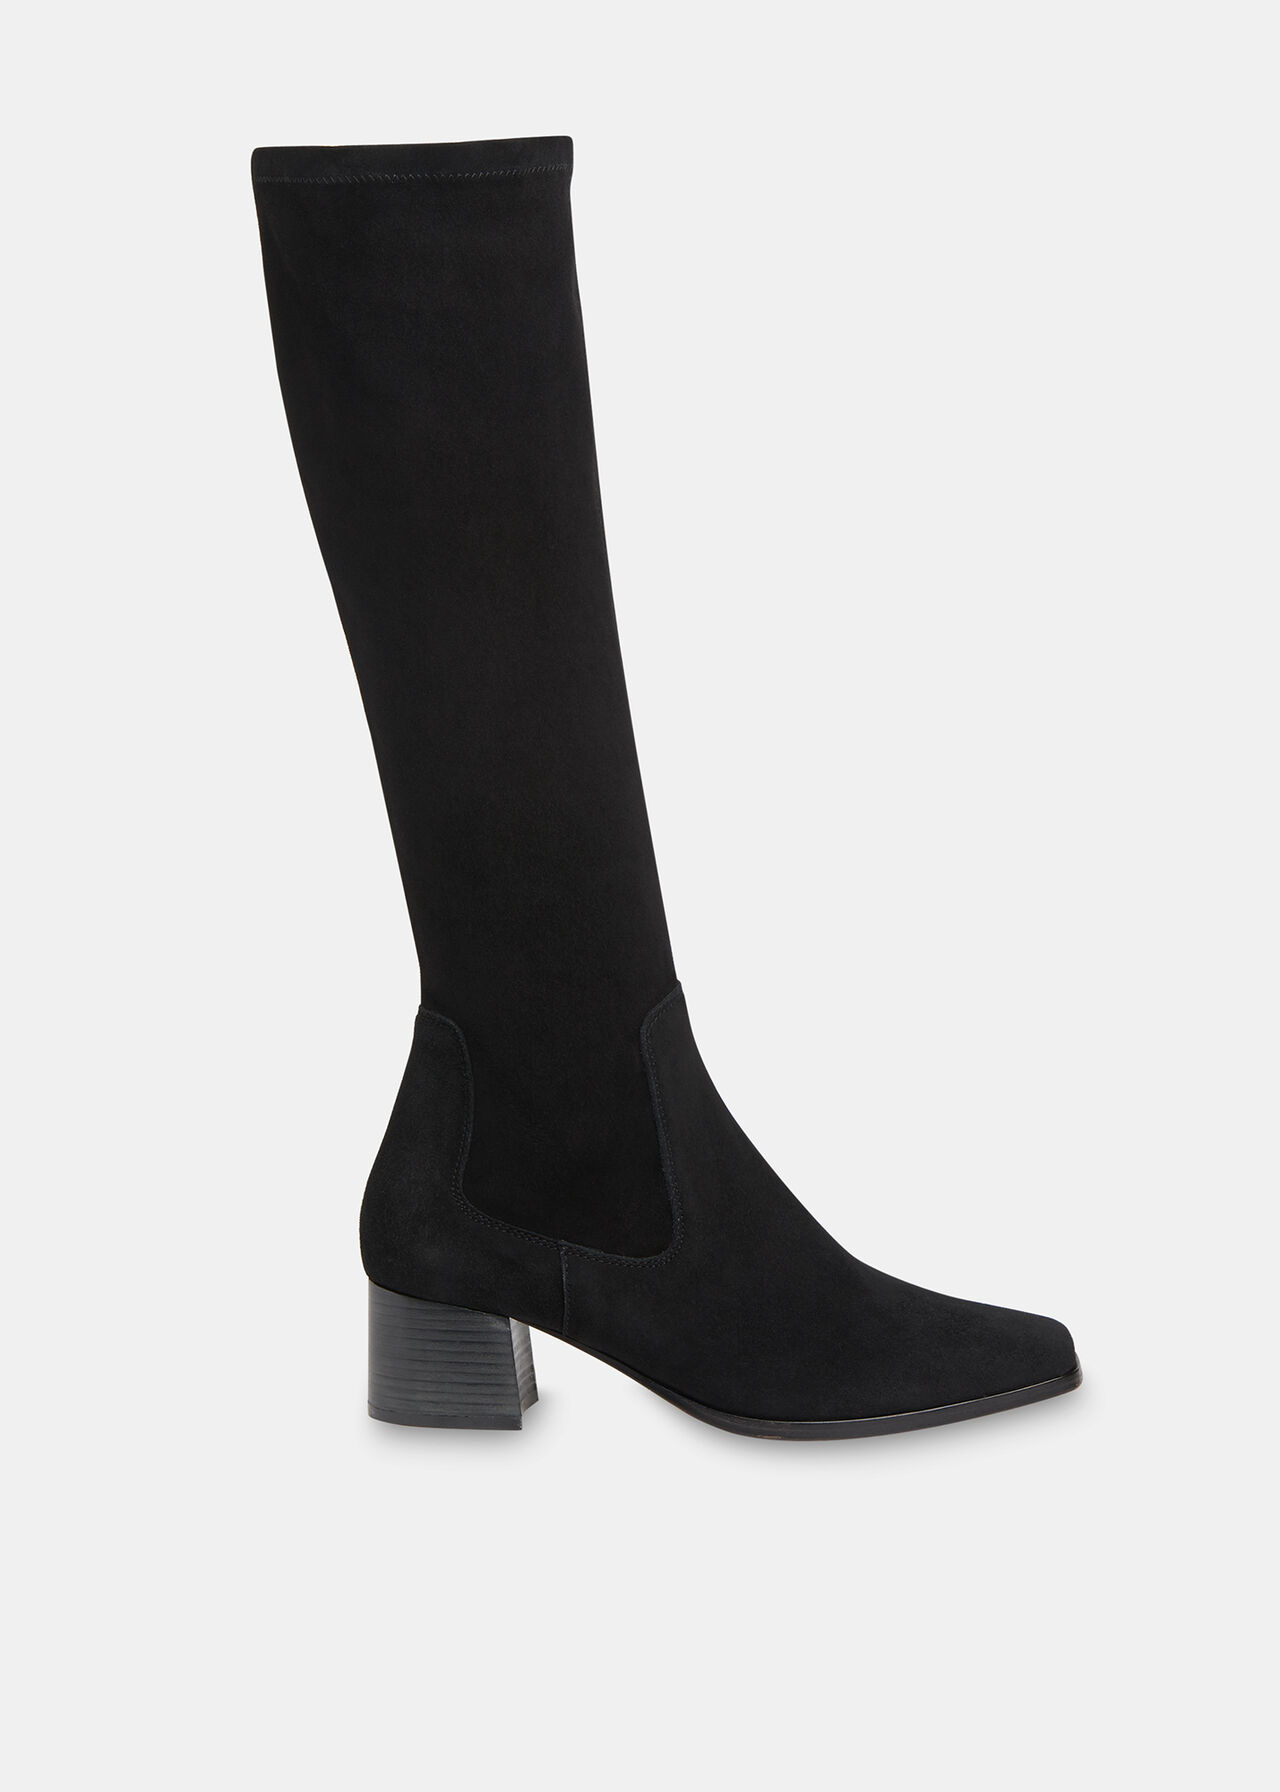 Black Blaire Stretch Knee High Boot | WHISTLES